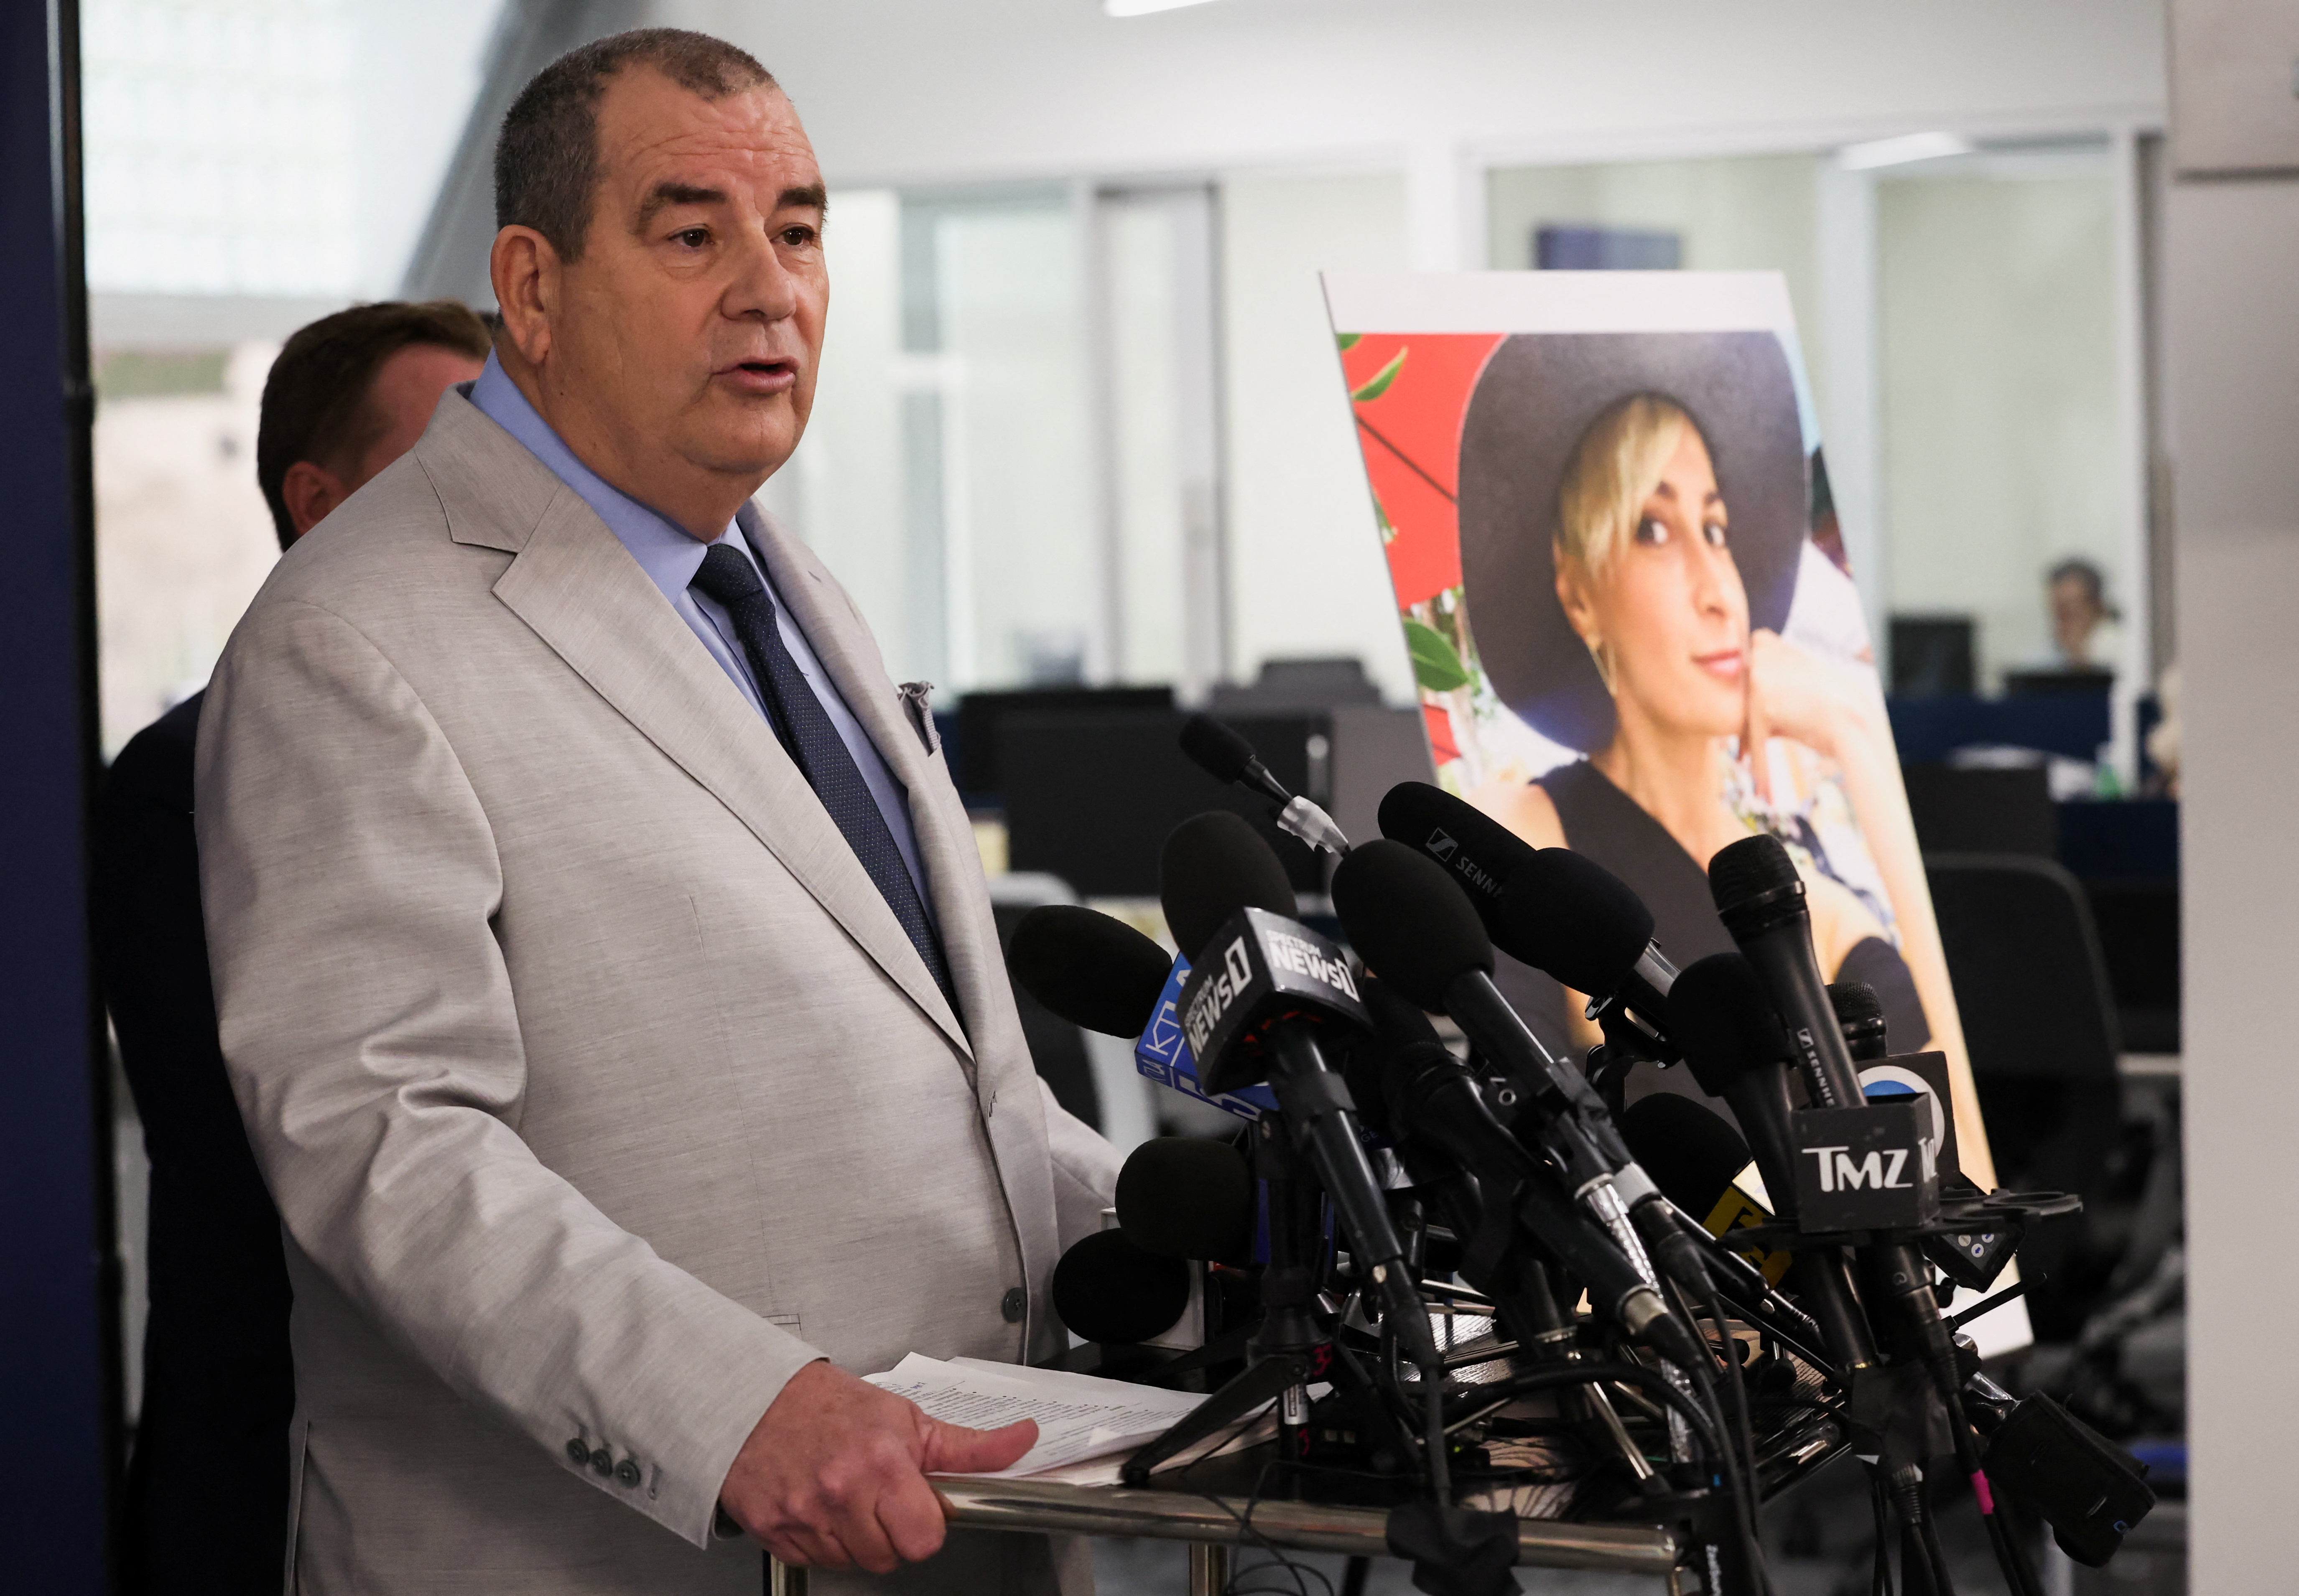 Brian Panish, lead attorney for late cinematographer Halyna Hutchins speaks to media next to her picture, in Los Angeles, California, U.S., February 15, 2022. REUTERS/Mario Anzuoni